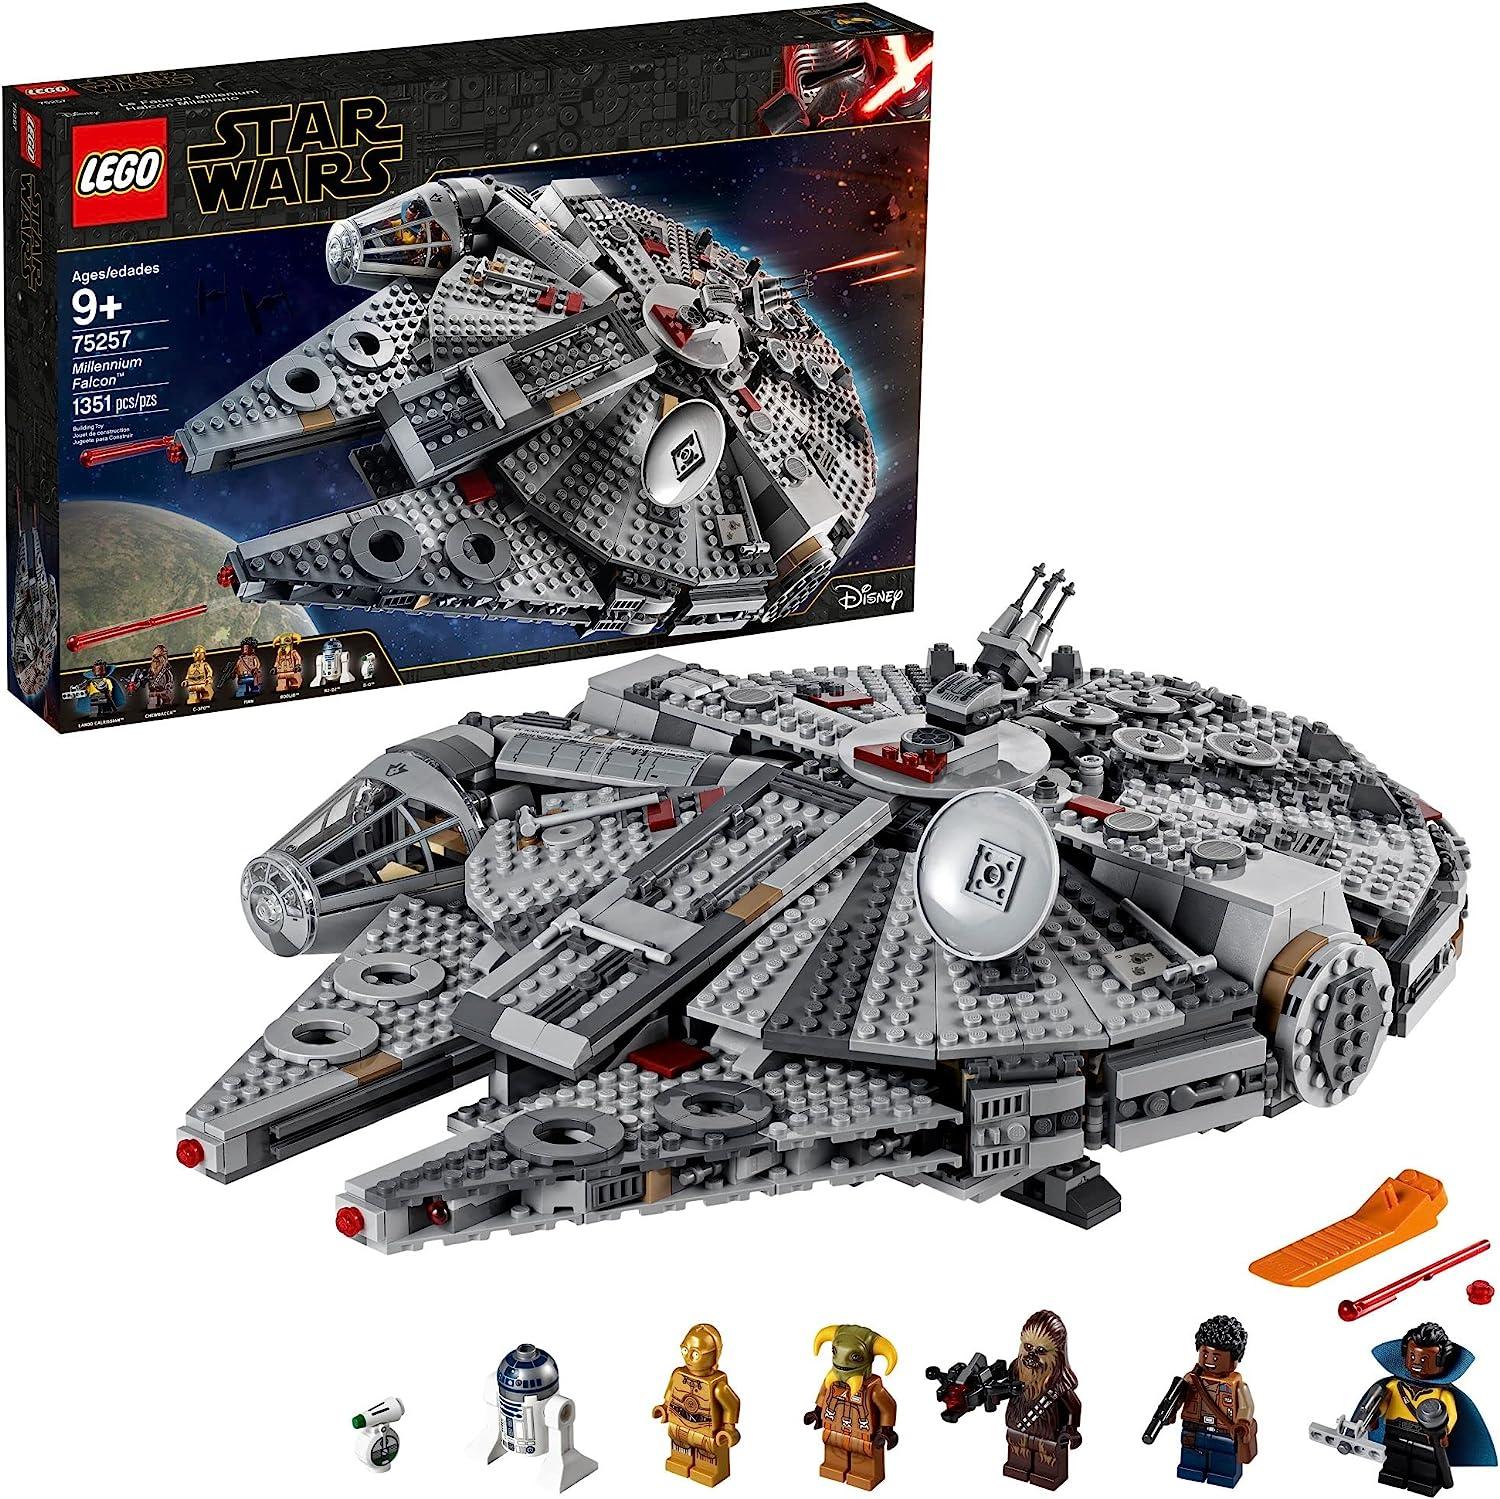 Lego Star Wars Millennium Falcon 75257 Building Set for $135.99 Shipped